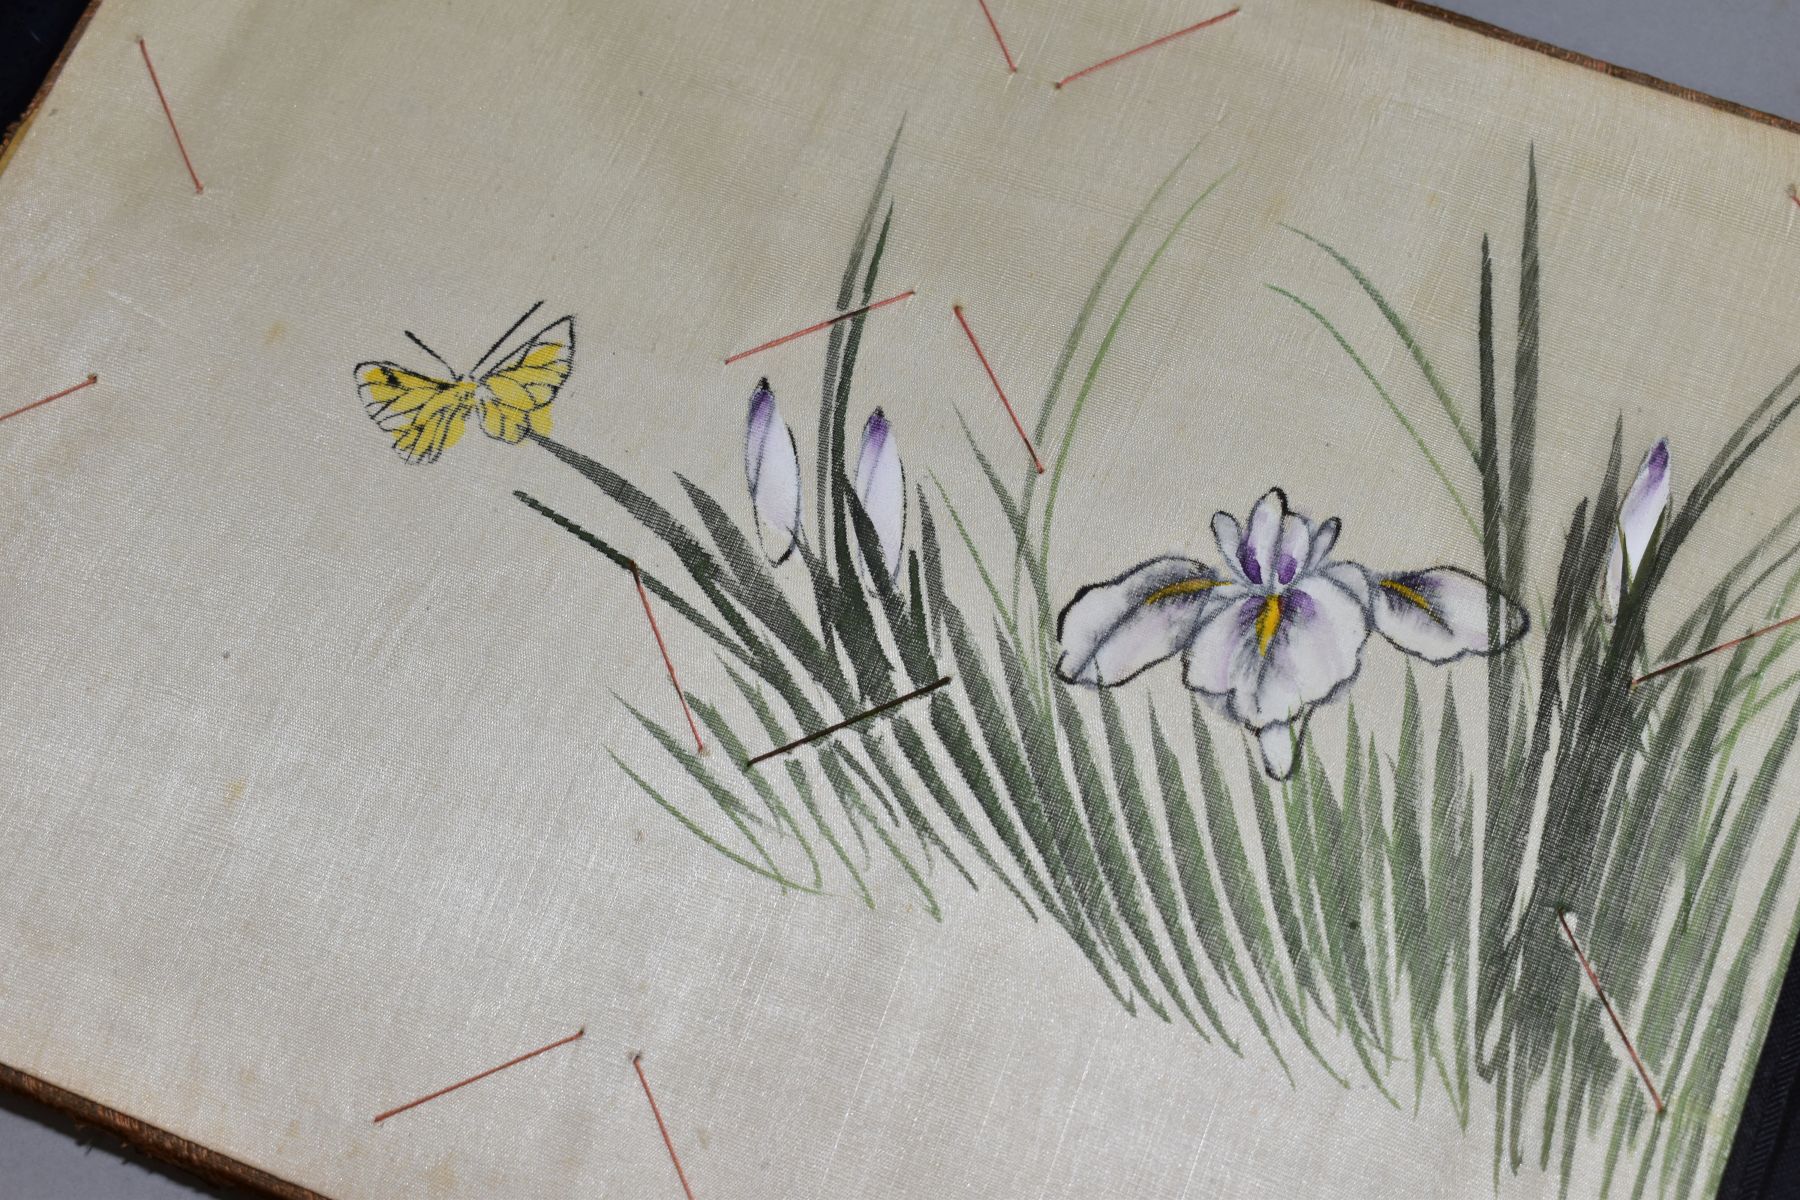 A SHIBYAMA LAQUERED PHOTOGRAPH/POSTCARD ALBUM, containing 20 leaves of painted silk illustrations, - Image 6 of 8